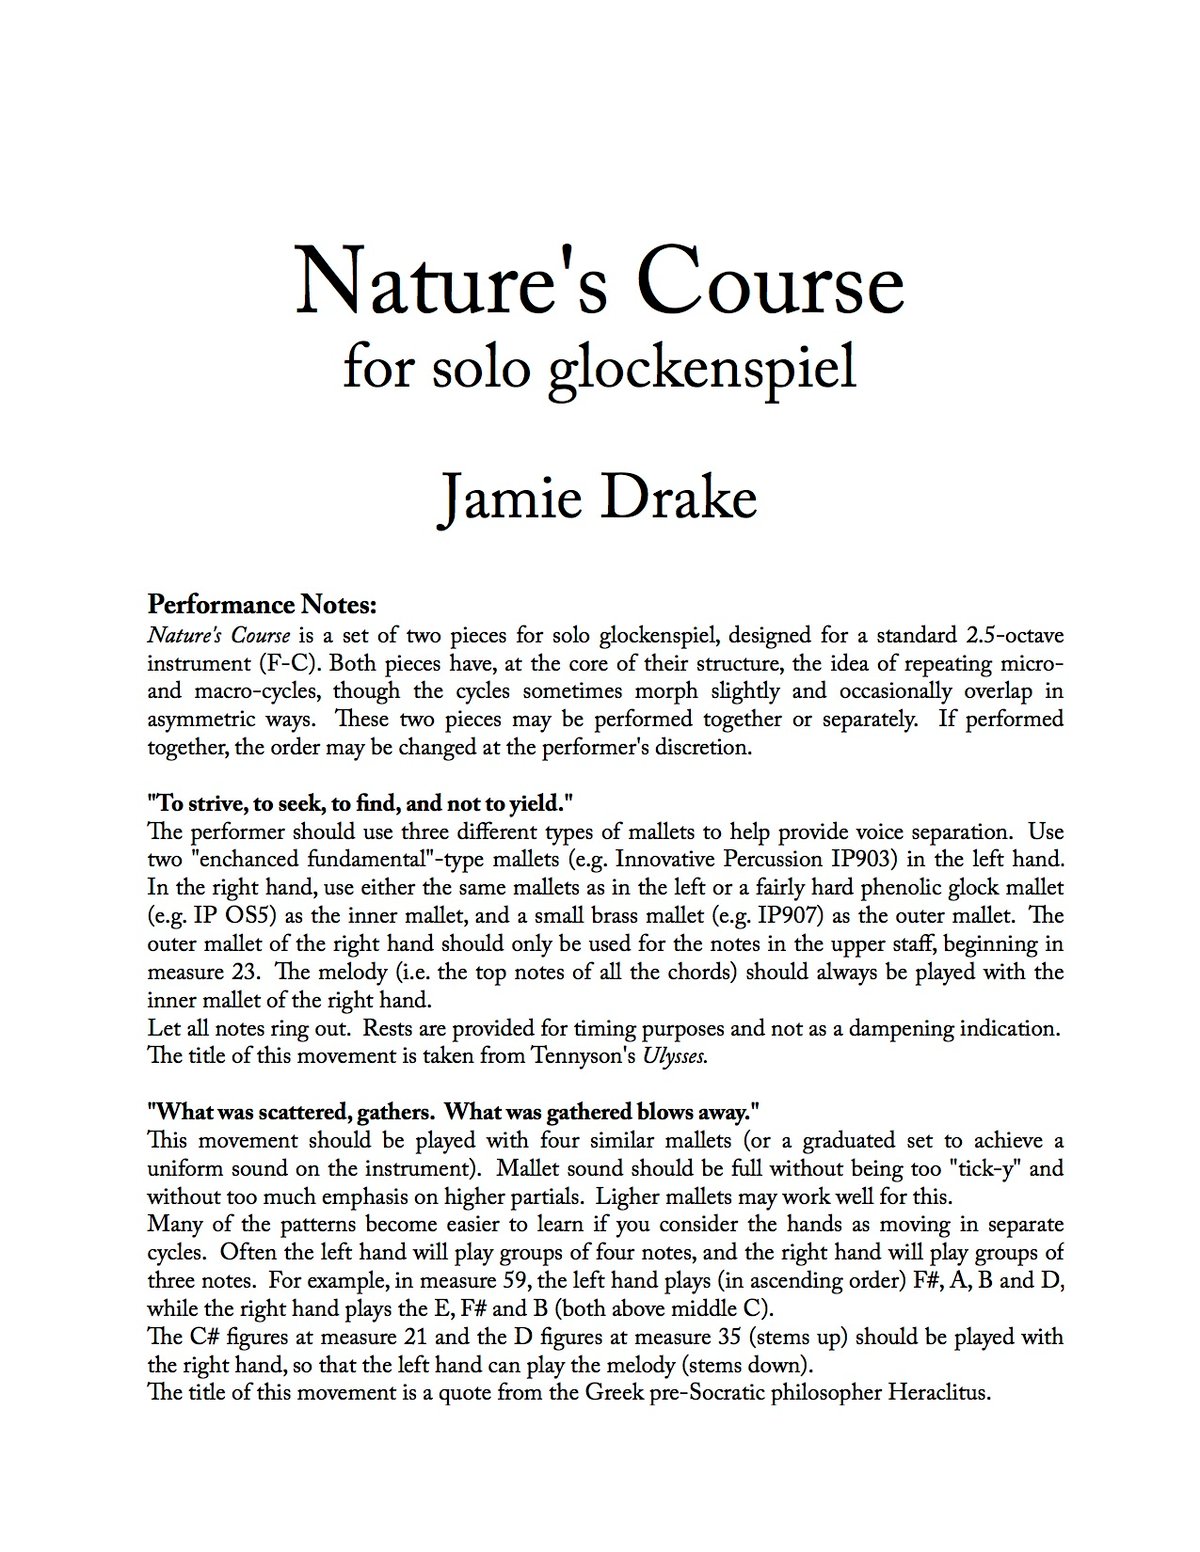 Image of Nature's Course (glockenspiel solo)